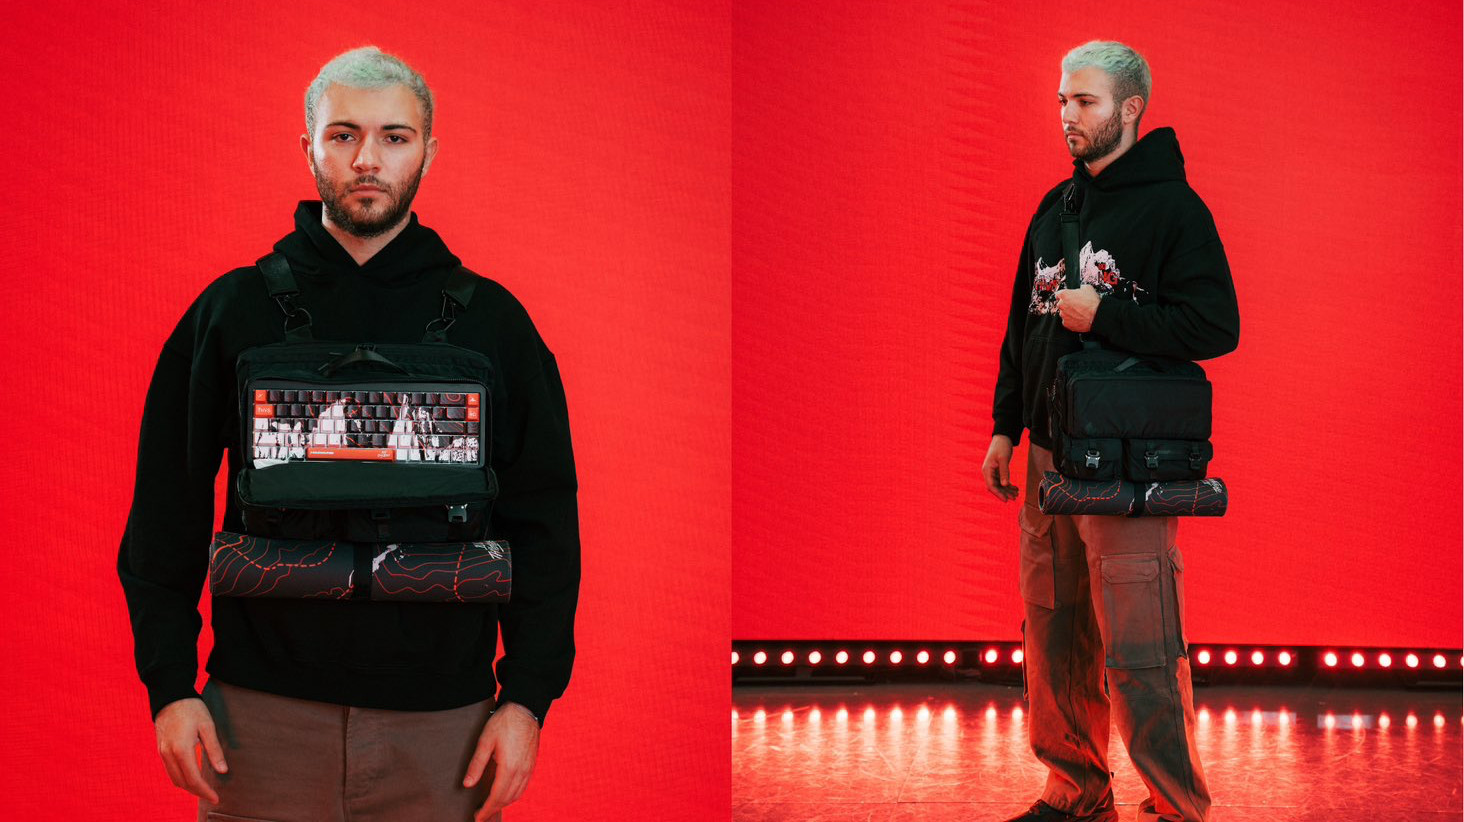 Higround introduced a "bulletproof vest" for gamers that contains a laptop, keyboard, headphones and mouse instead of bullets